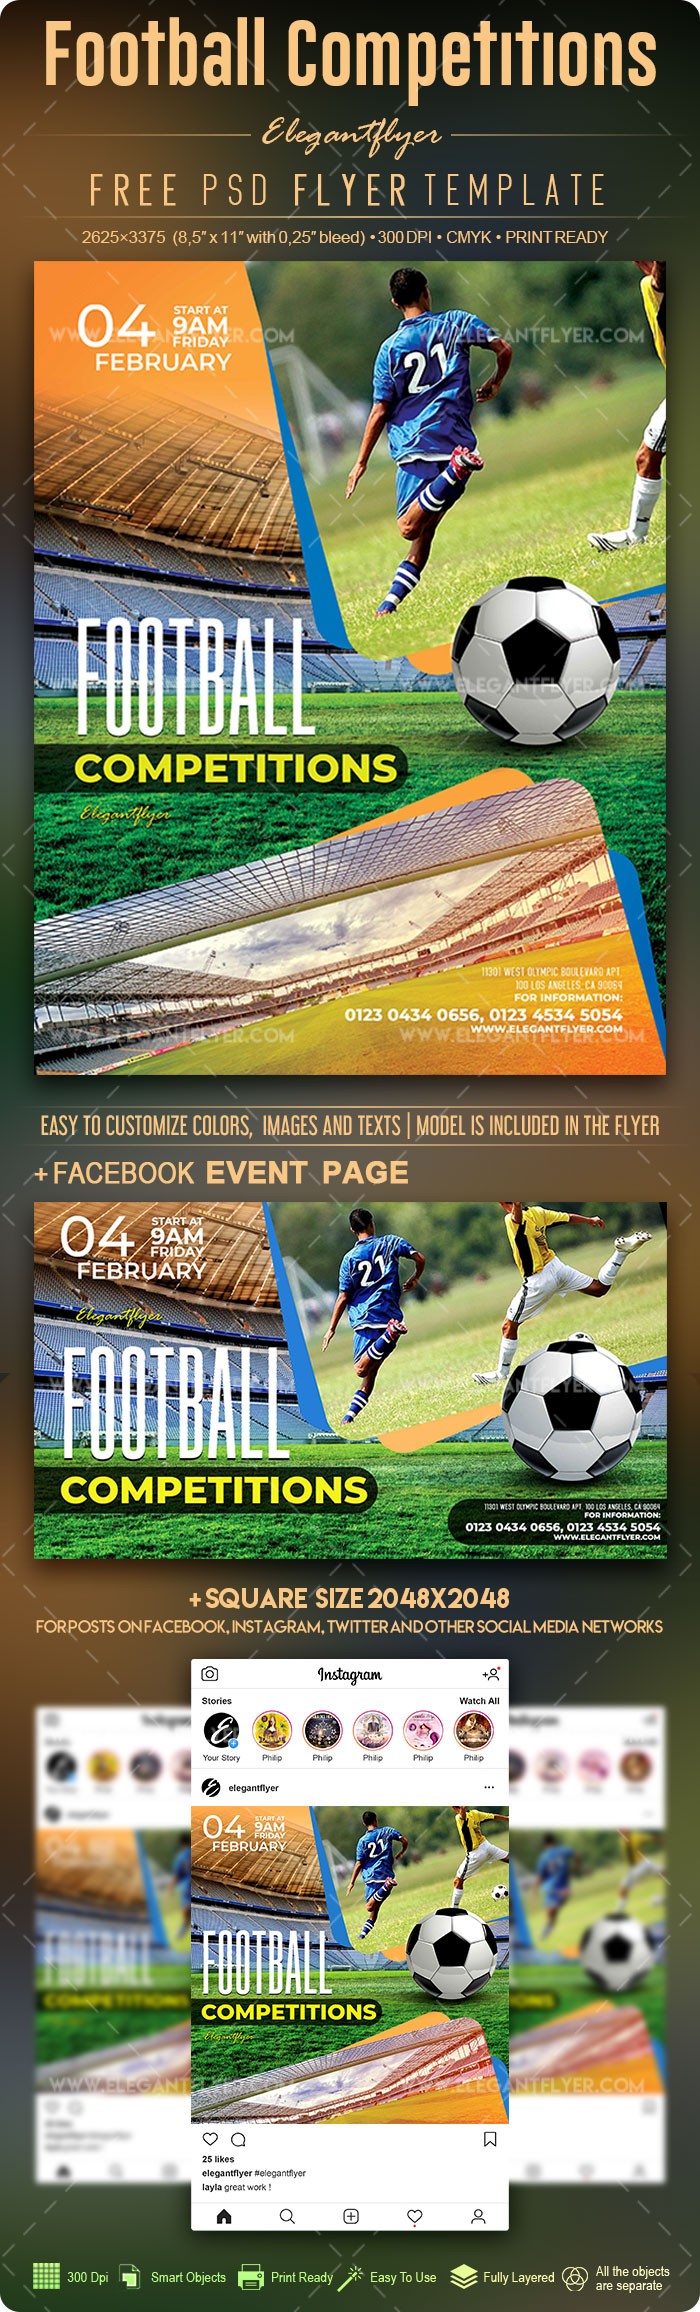 Football Competitions by ElegantFlyer